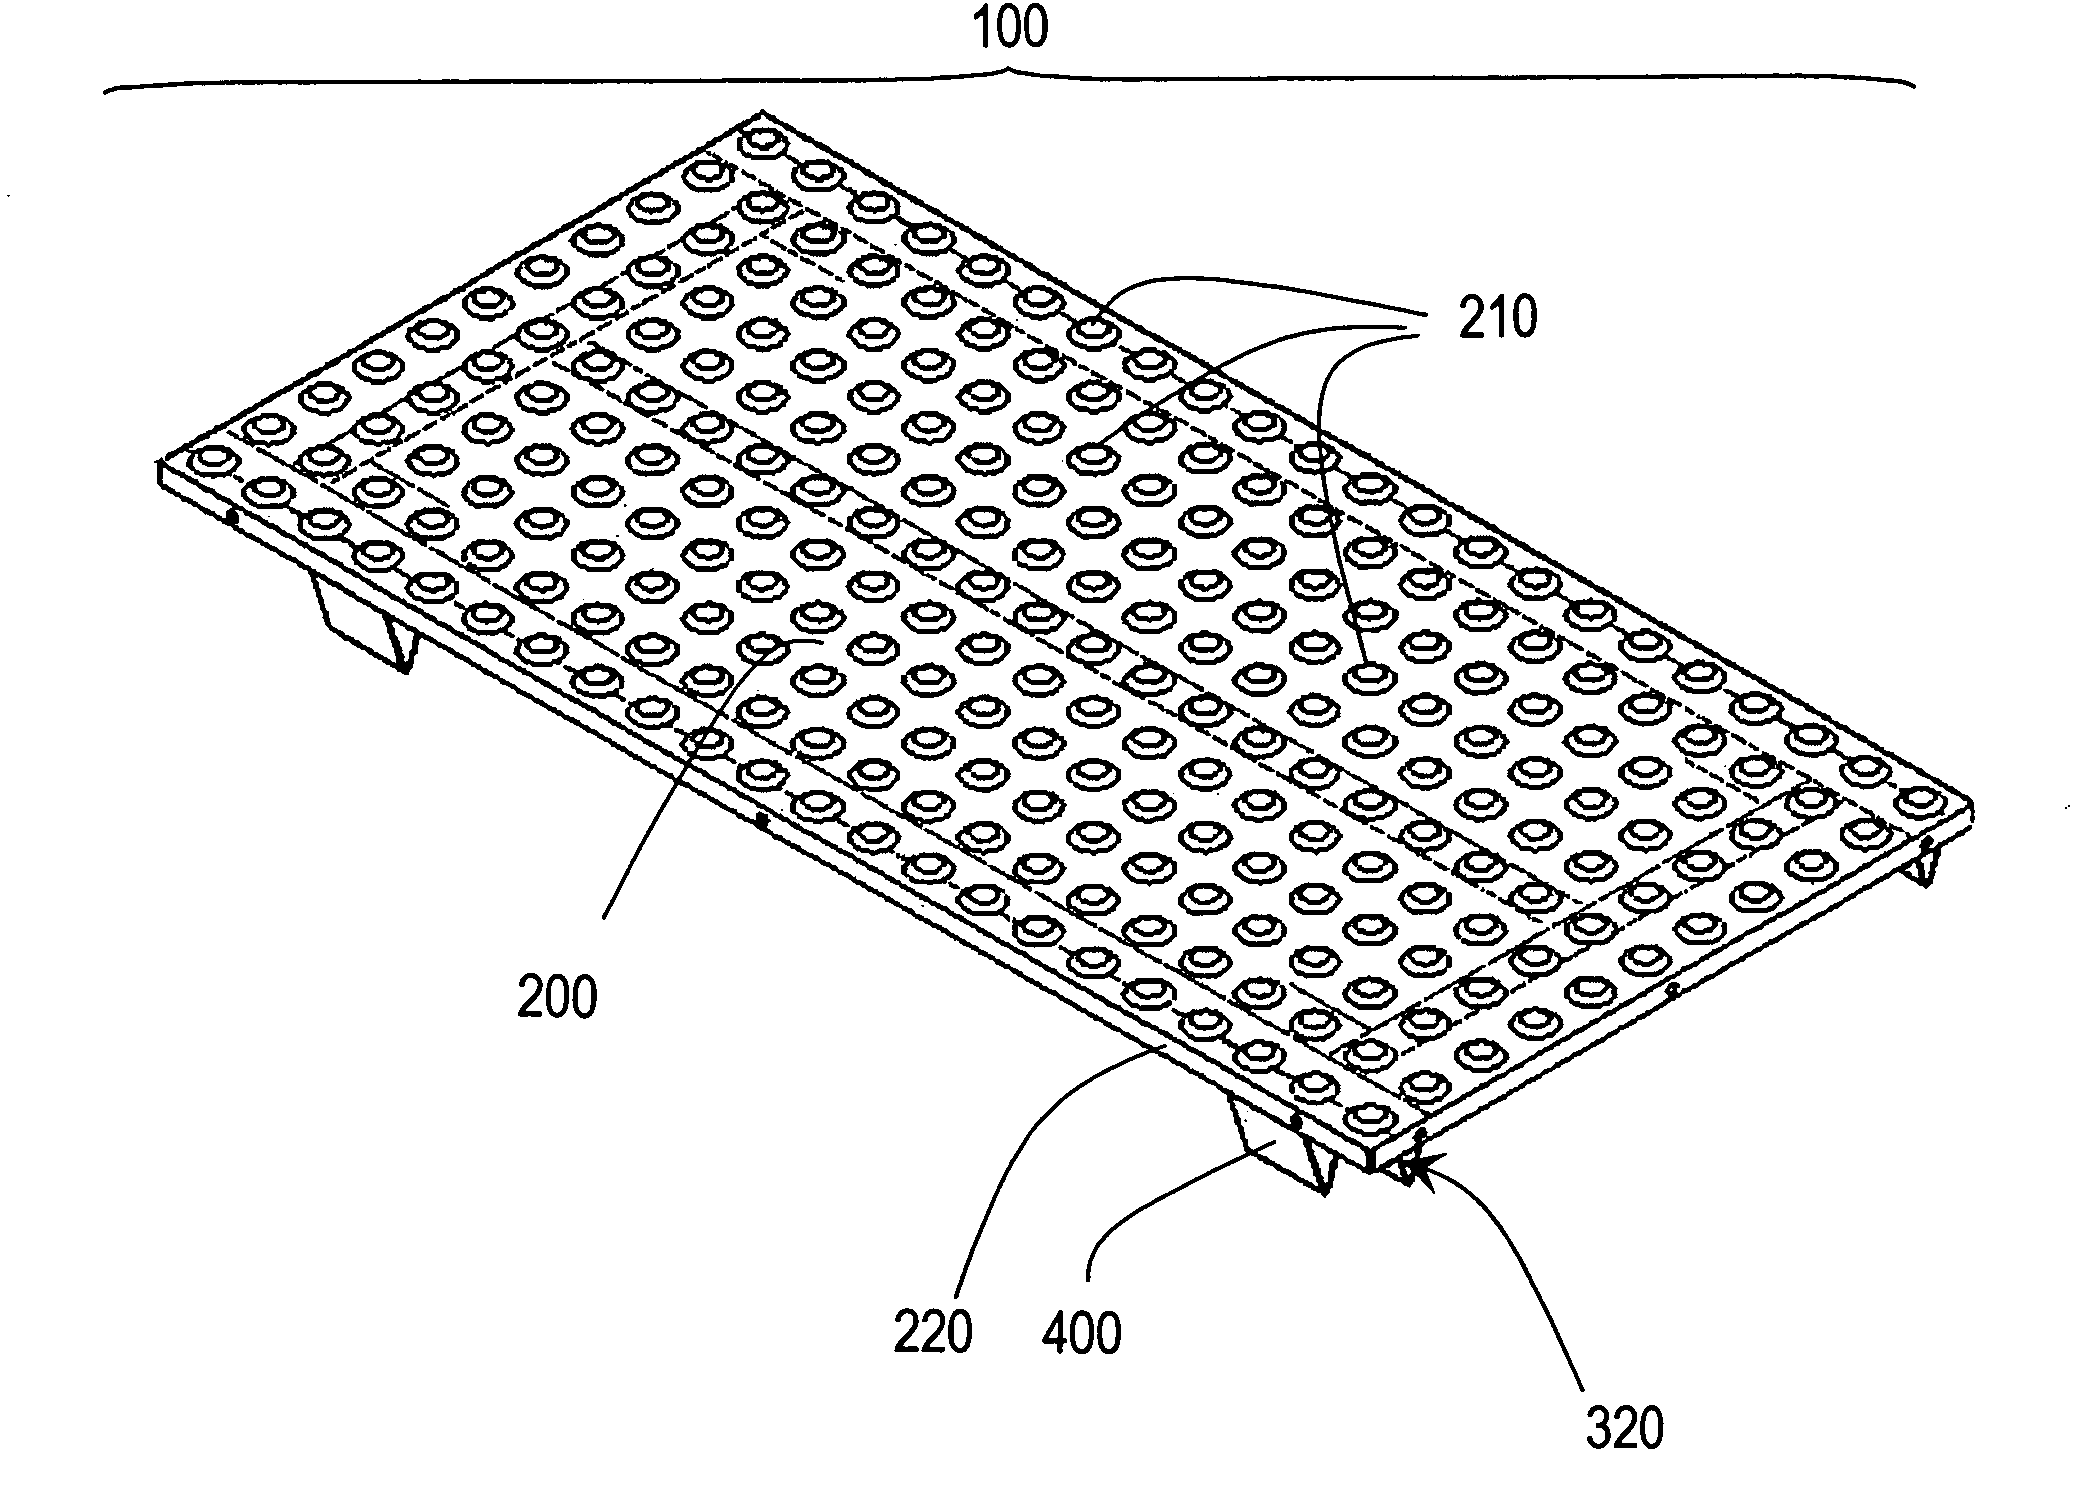 Tactile tile with improved reinforced embedment plate